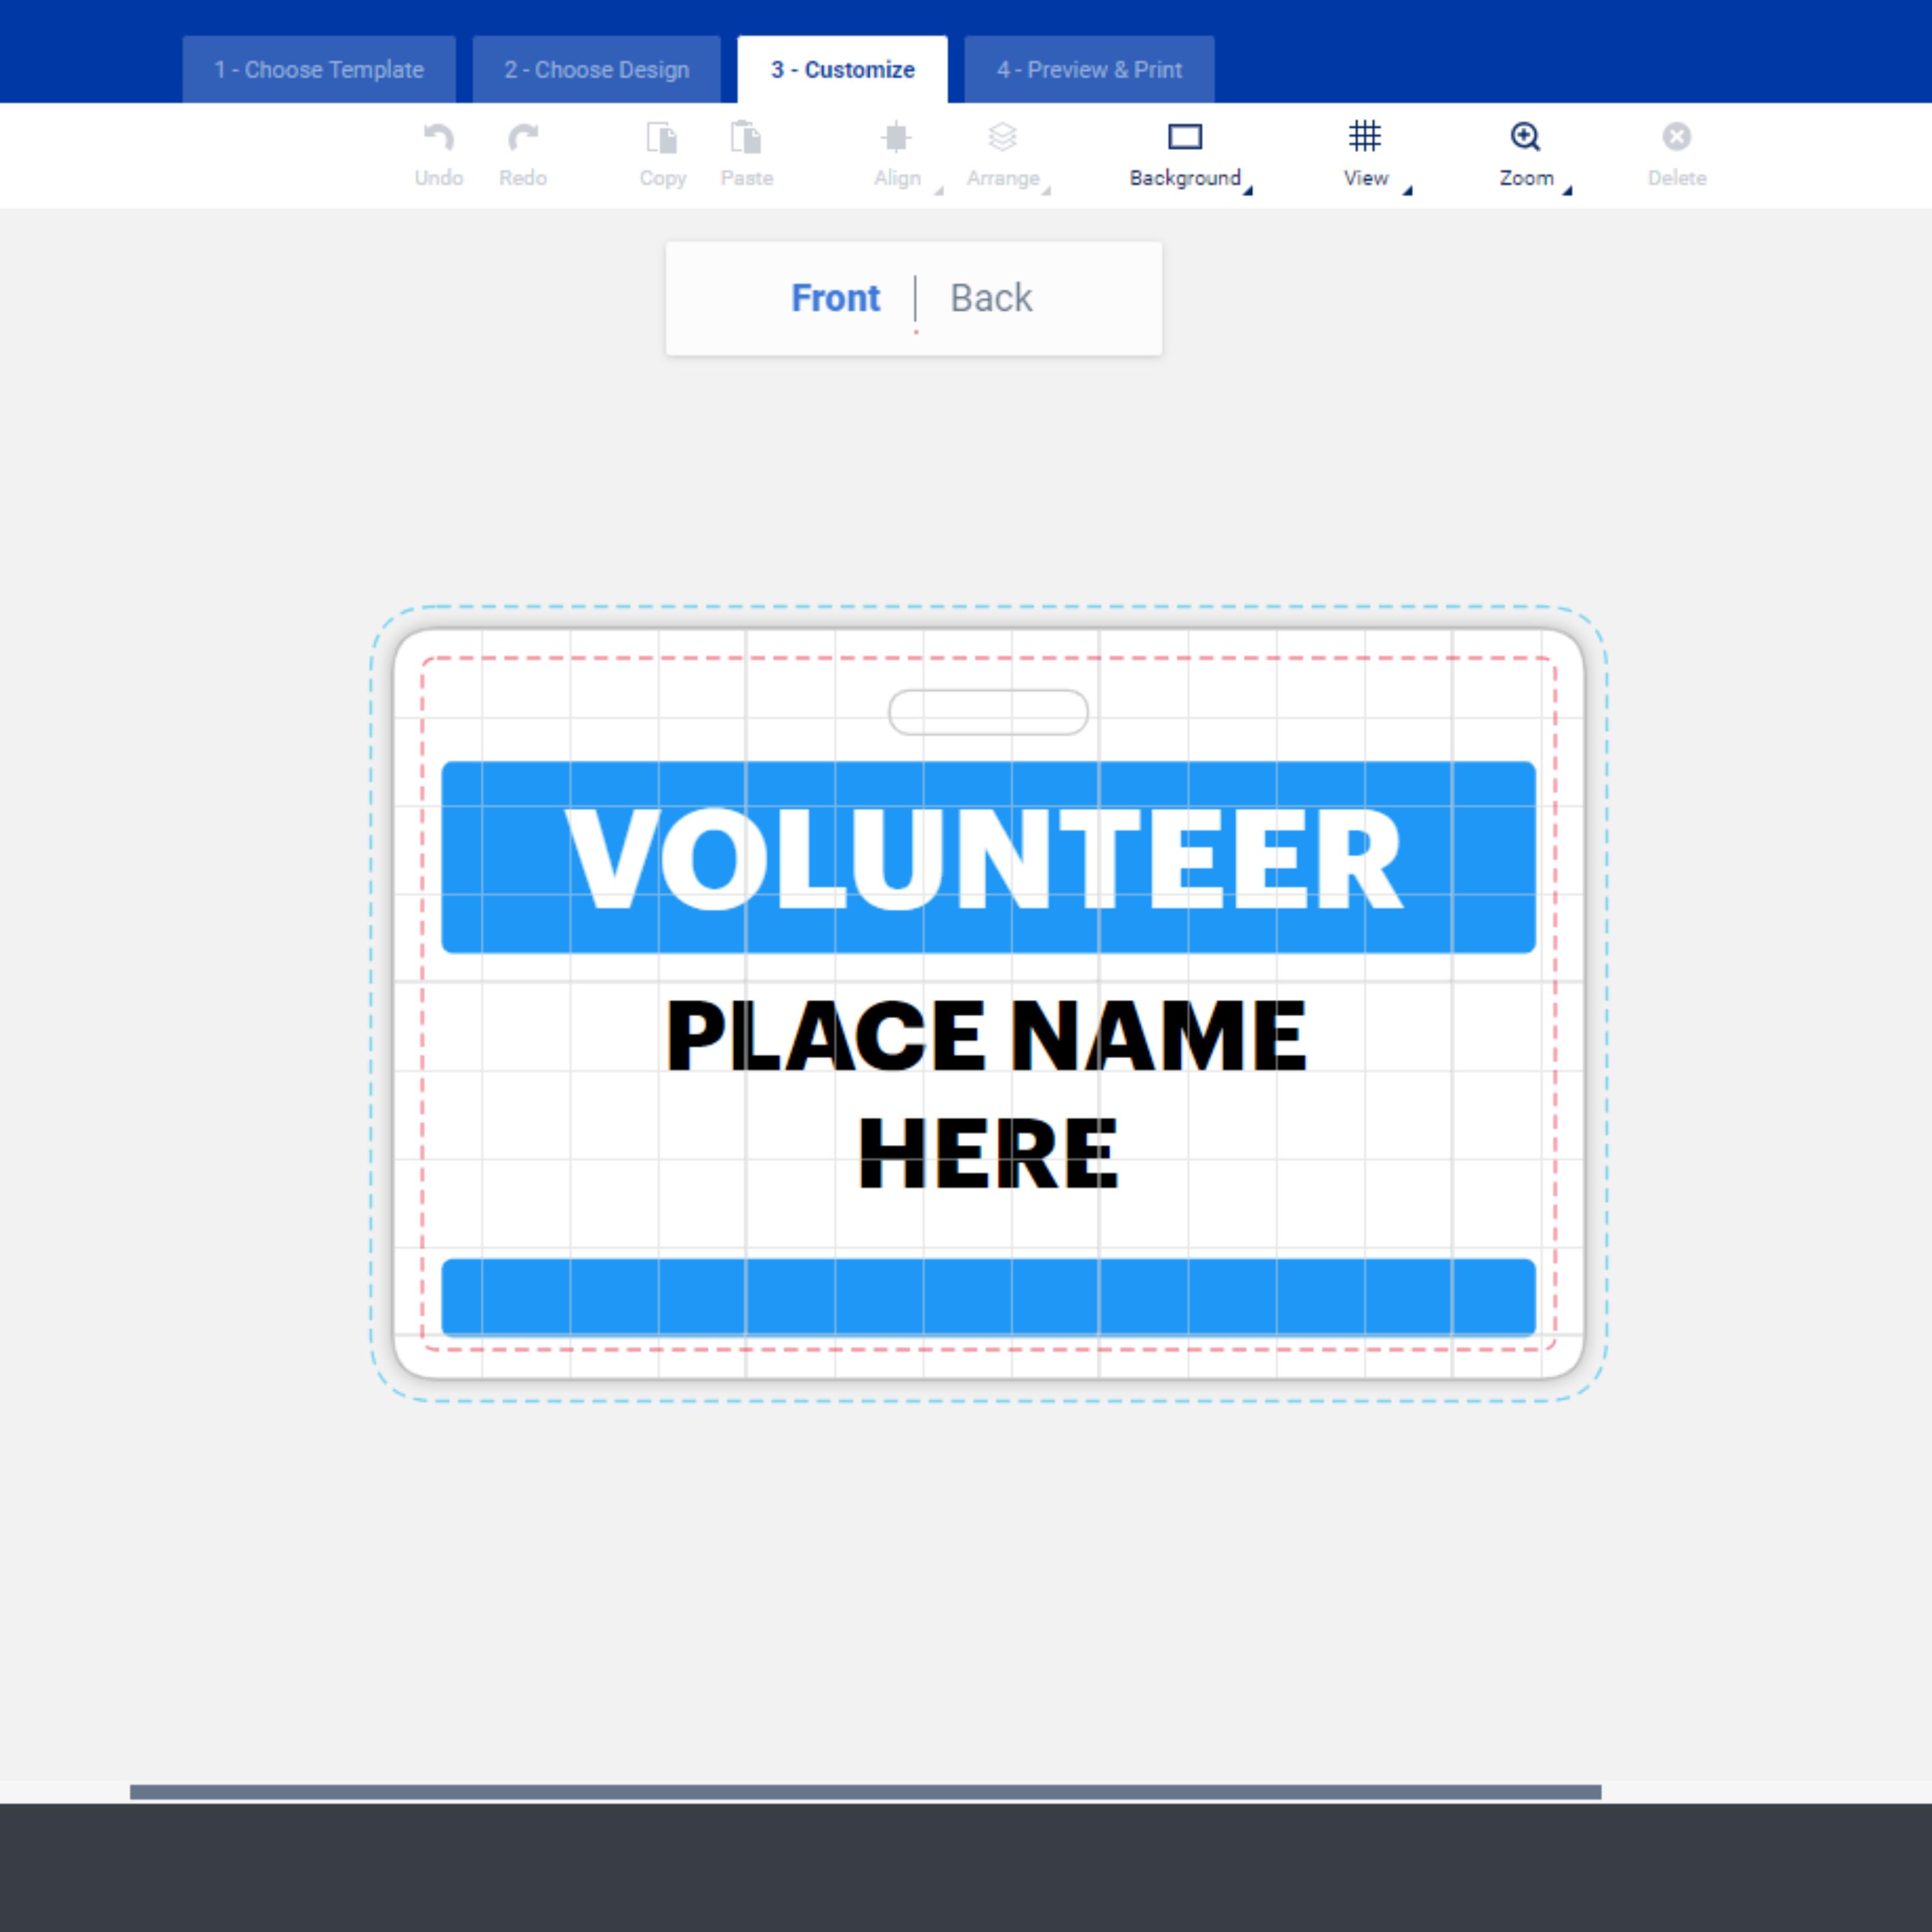 Free Avery template for a volunteer employee ID badge. The image is a screenshot of Avery Design and Print Online showing the template in the editor screen.